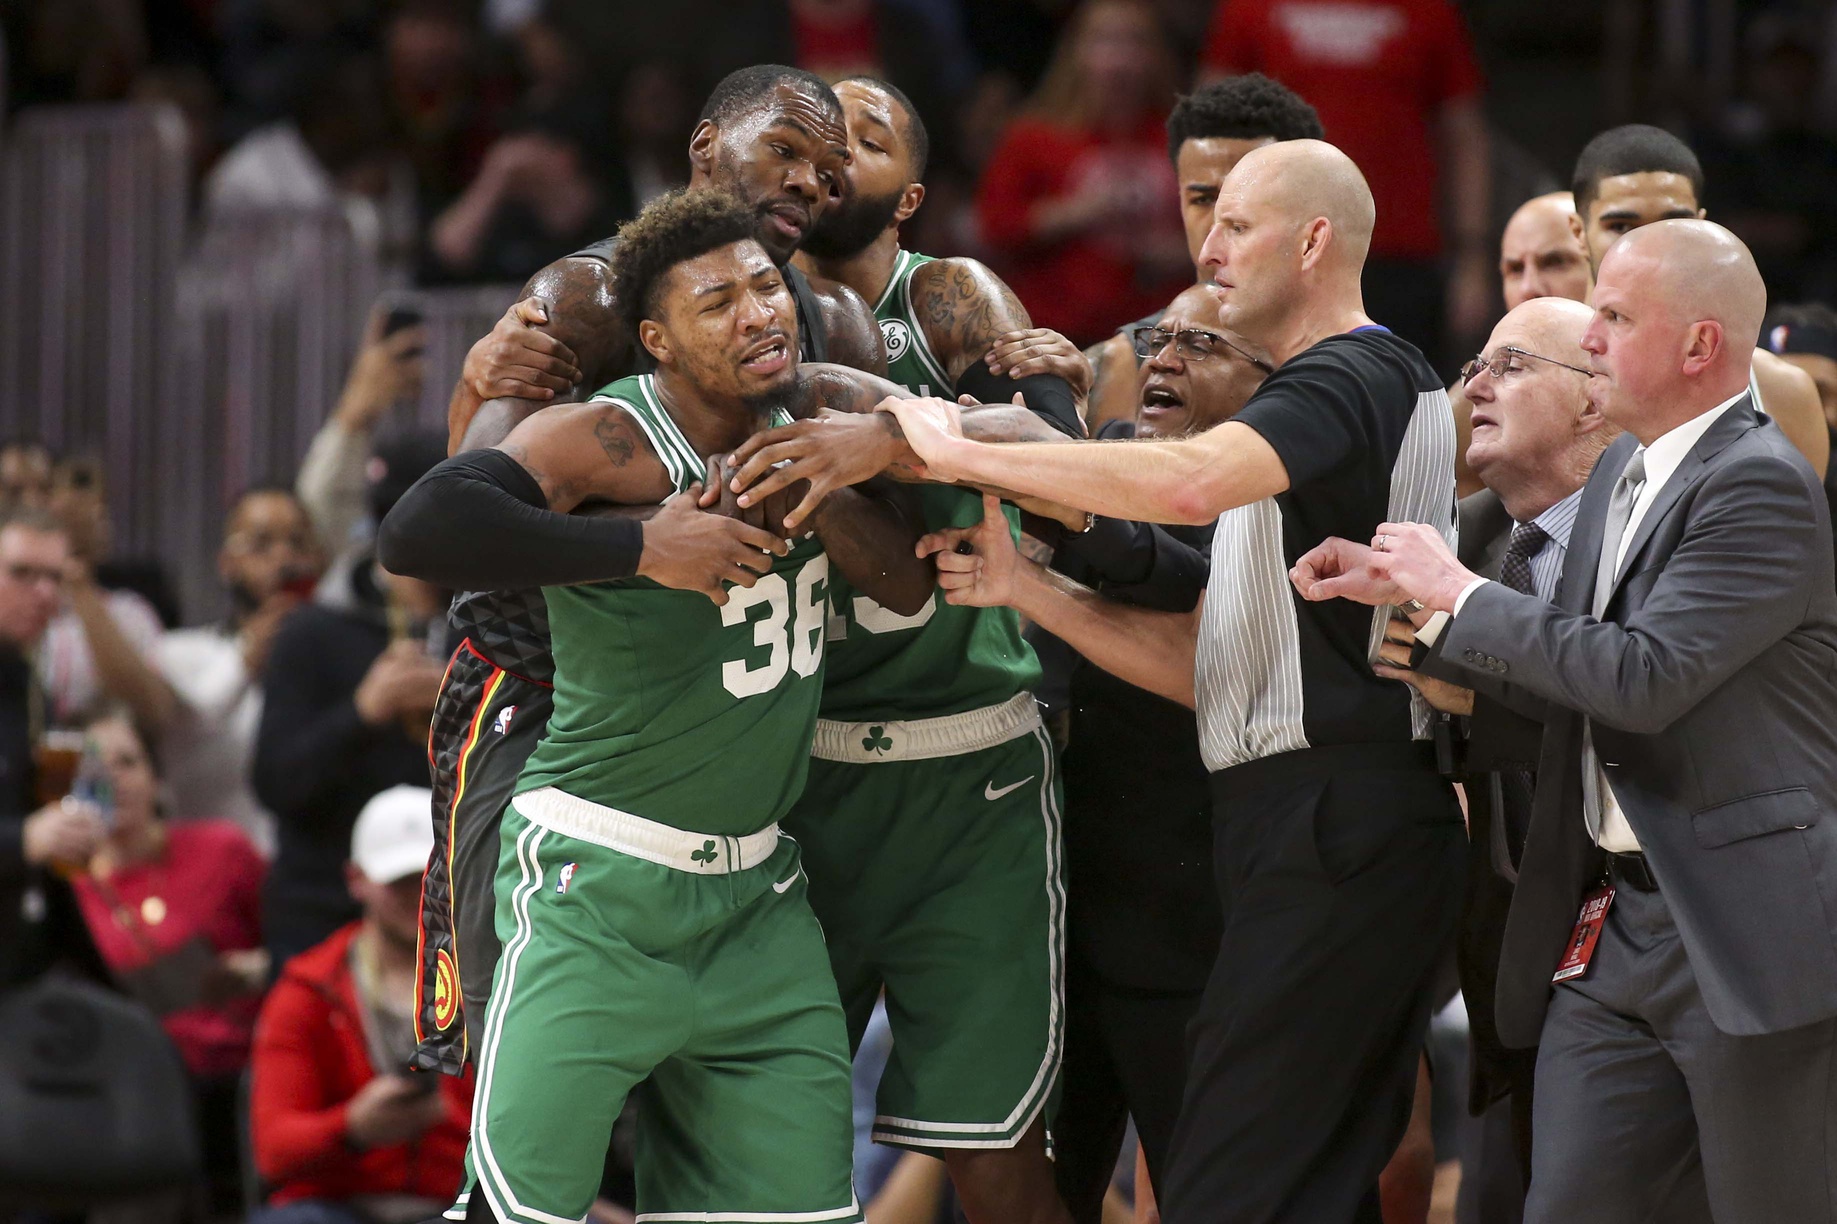 WATCH: Marcus Smart goes after DeAndre' Bembry following ejection1837 x 1224